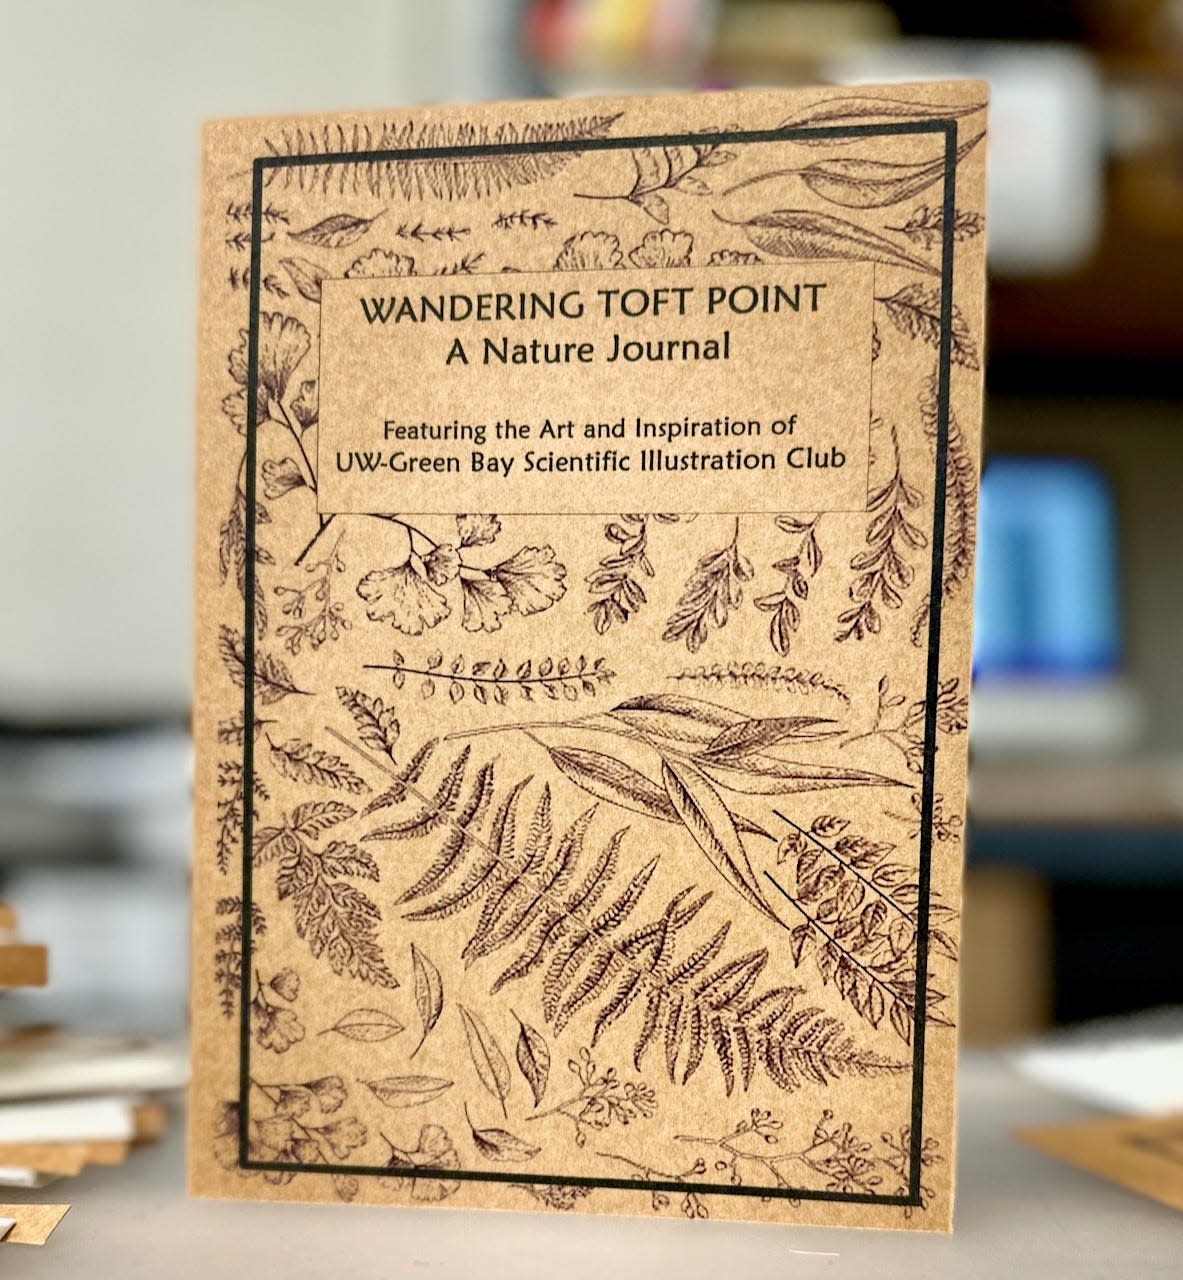 "Wandering Toft Point: A Nature Journal" is a new interactive book celebrating the state natural area in Baileys Harbor with space for readers who visit the area to record and sketch their own observations. The book is being released Dec. 12 by the University of Wisconsin-Green Bay's The Teaching Press program..